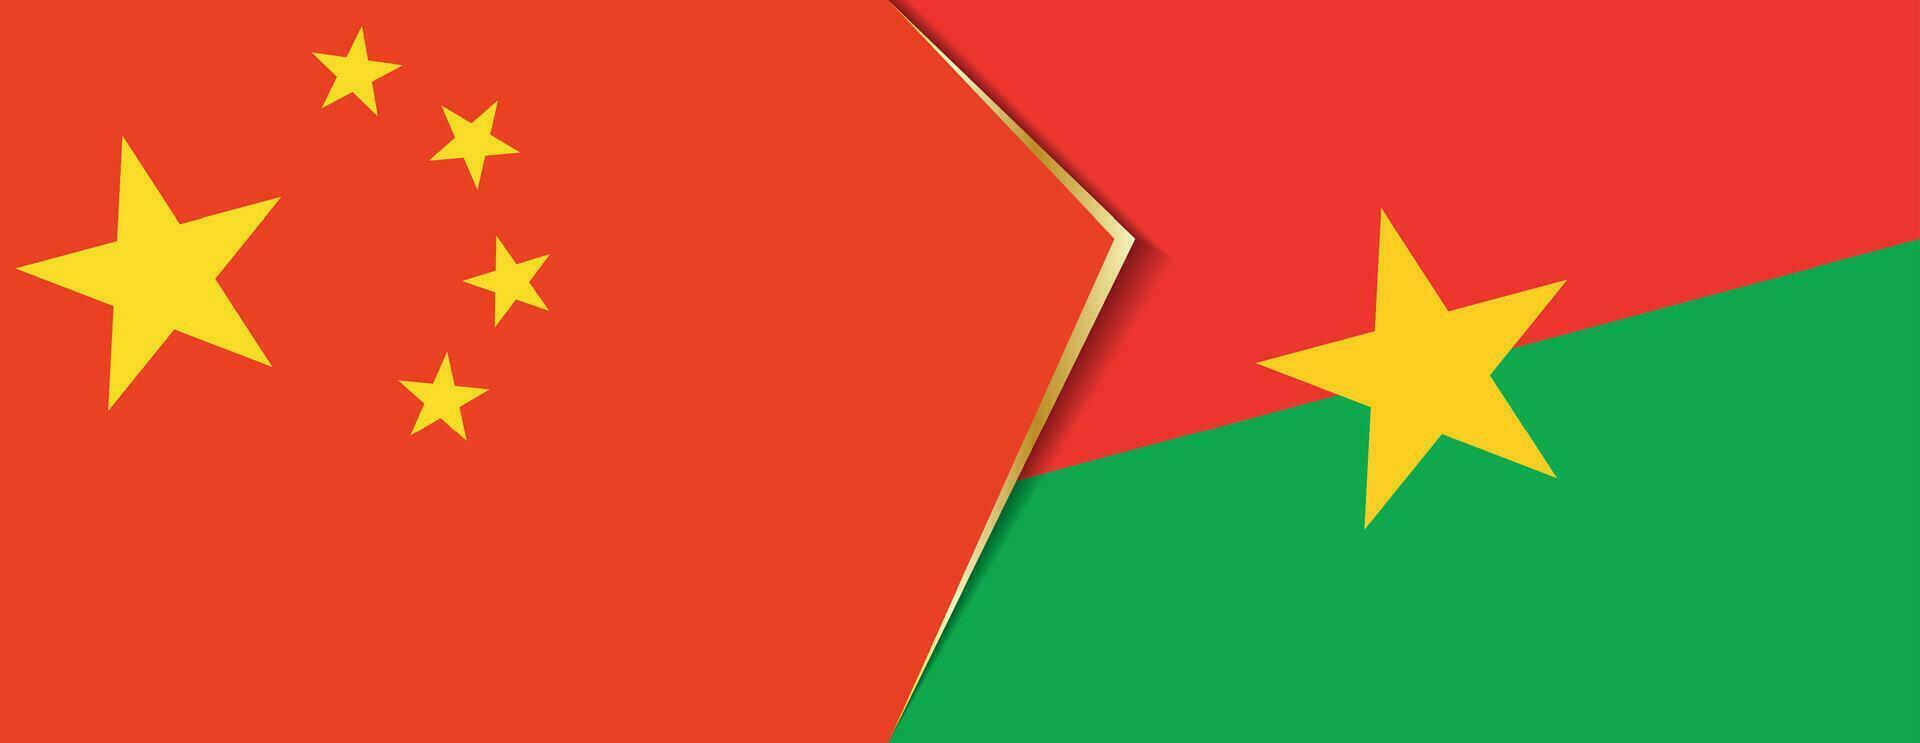 China and Burkina Faso flags, two vector flags.